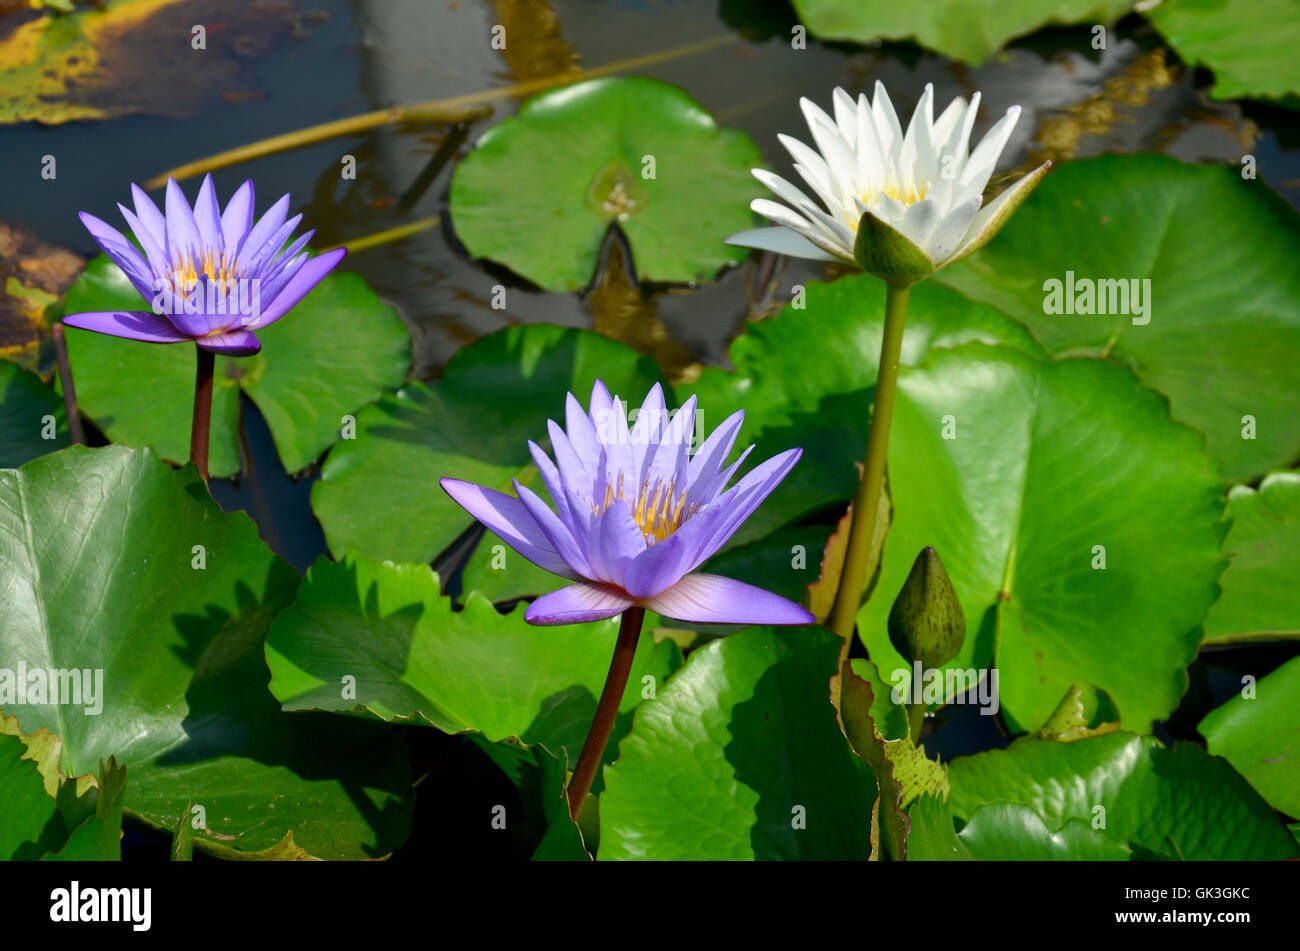 White lotus flower and violet water lily blossom with Molly fish or Swordtail fishes swimming in water tank at garden Stock Photo